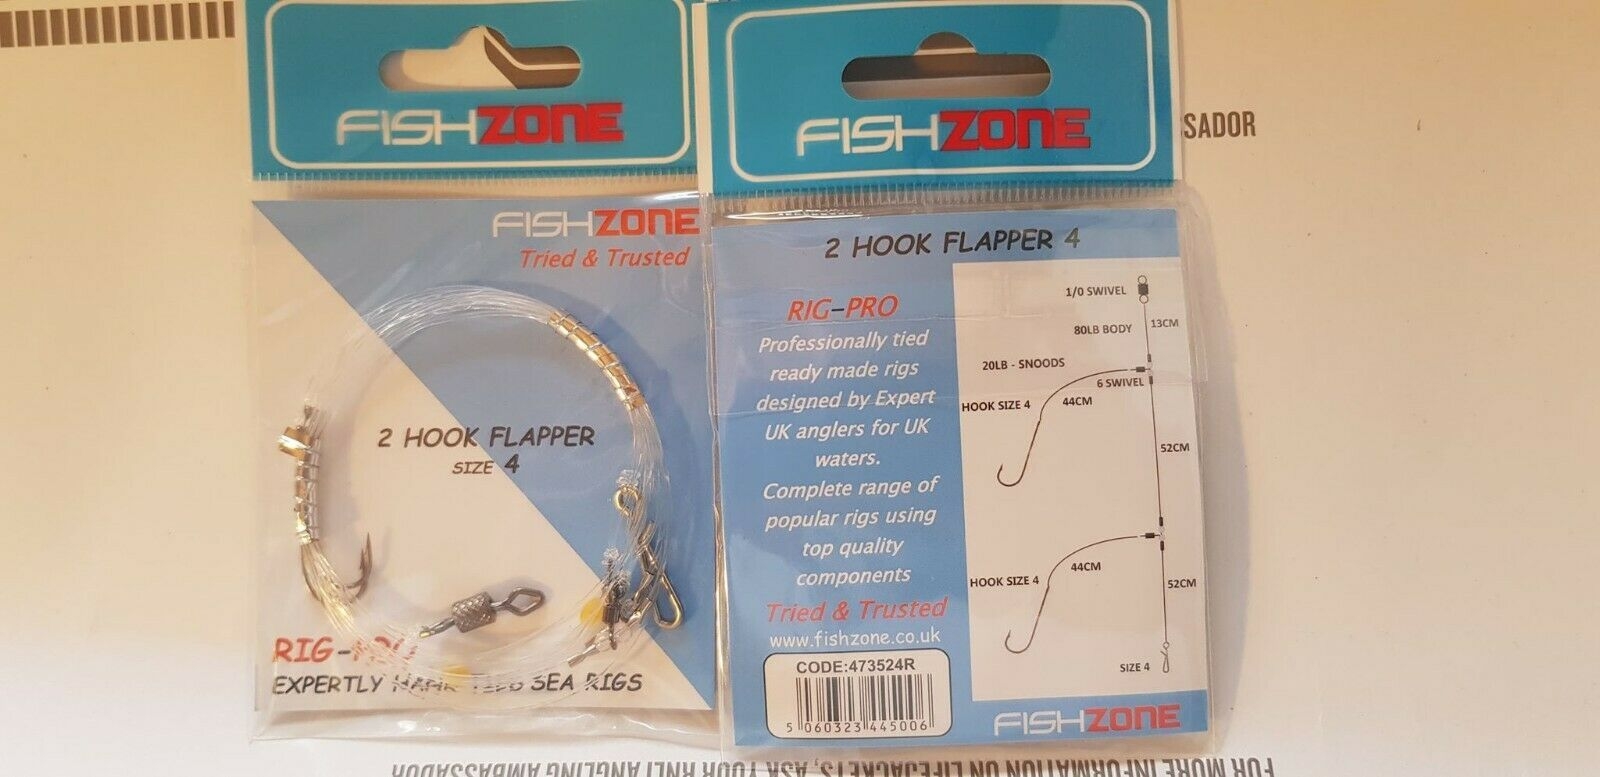 FishZone 2 hook flapper size 4 scratching rig sea fishing rig